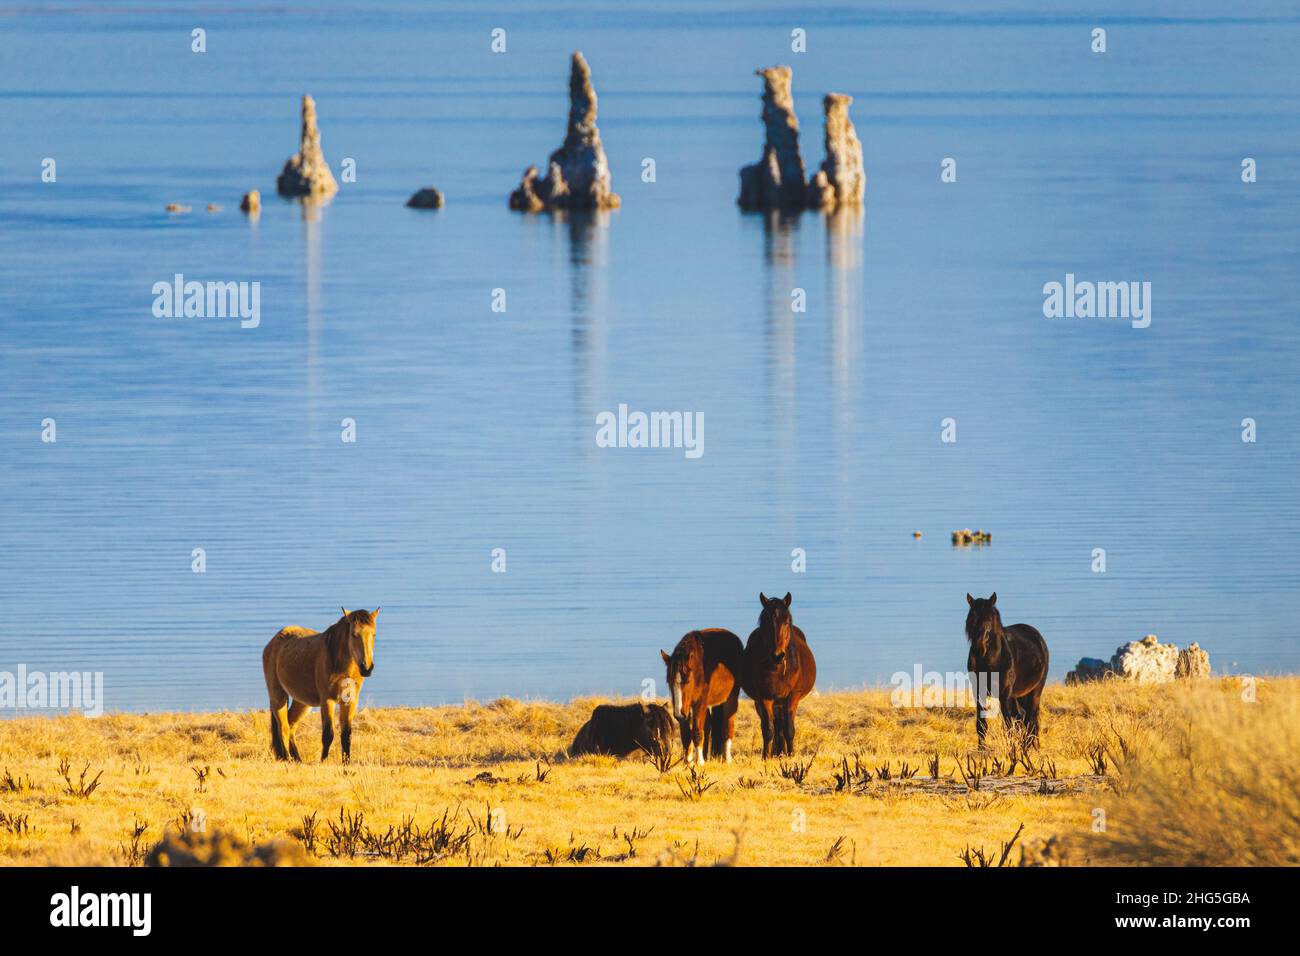 Wild horses (Mustangs) on the shore of Mono Lake in Mono County, California USA with a tufa formation in the background. Stock Photo